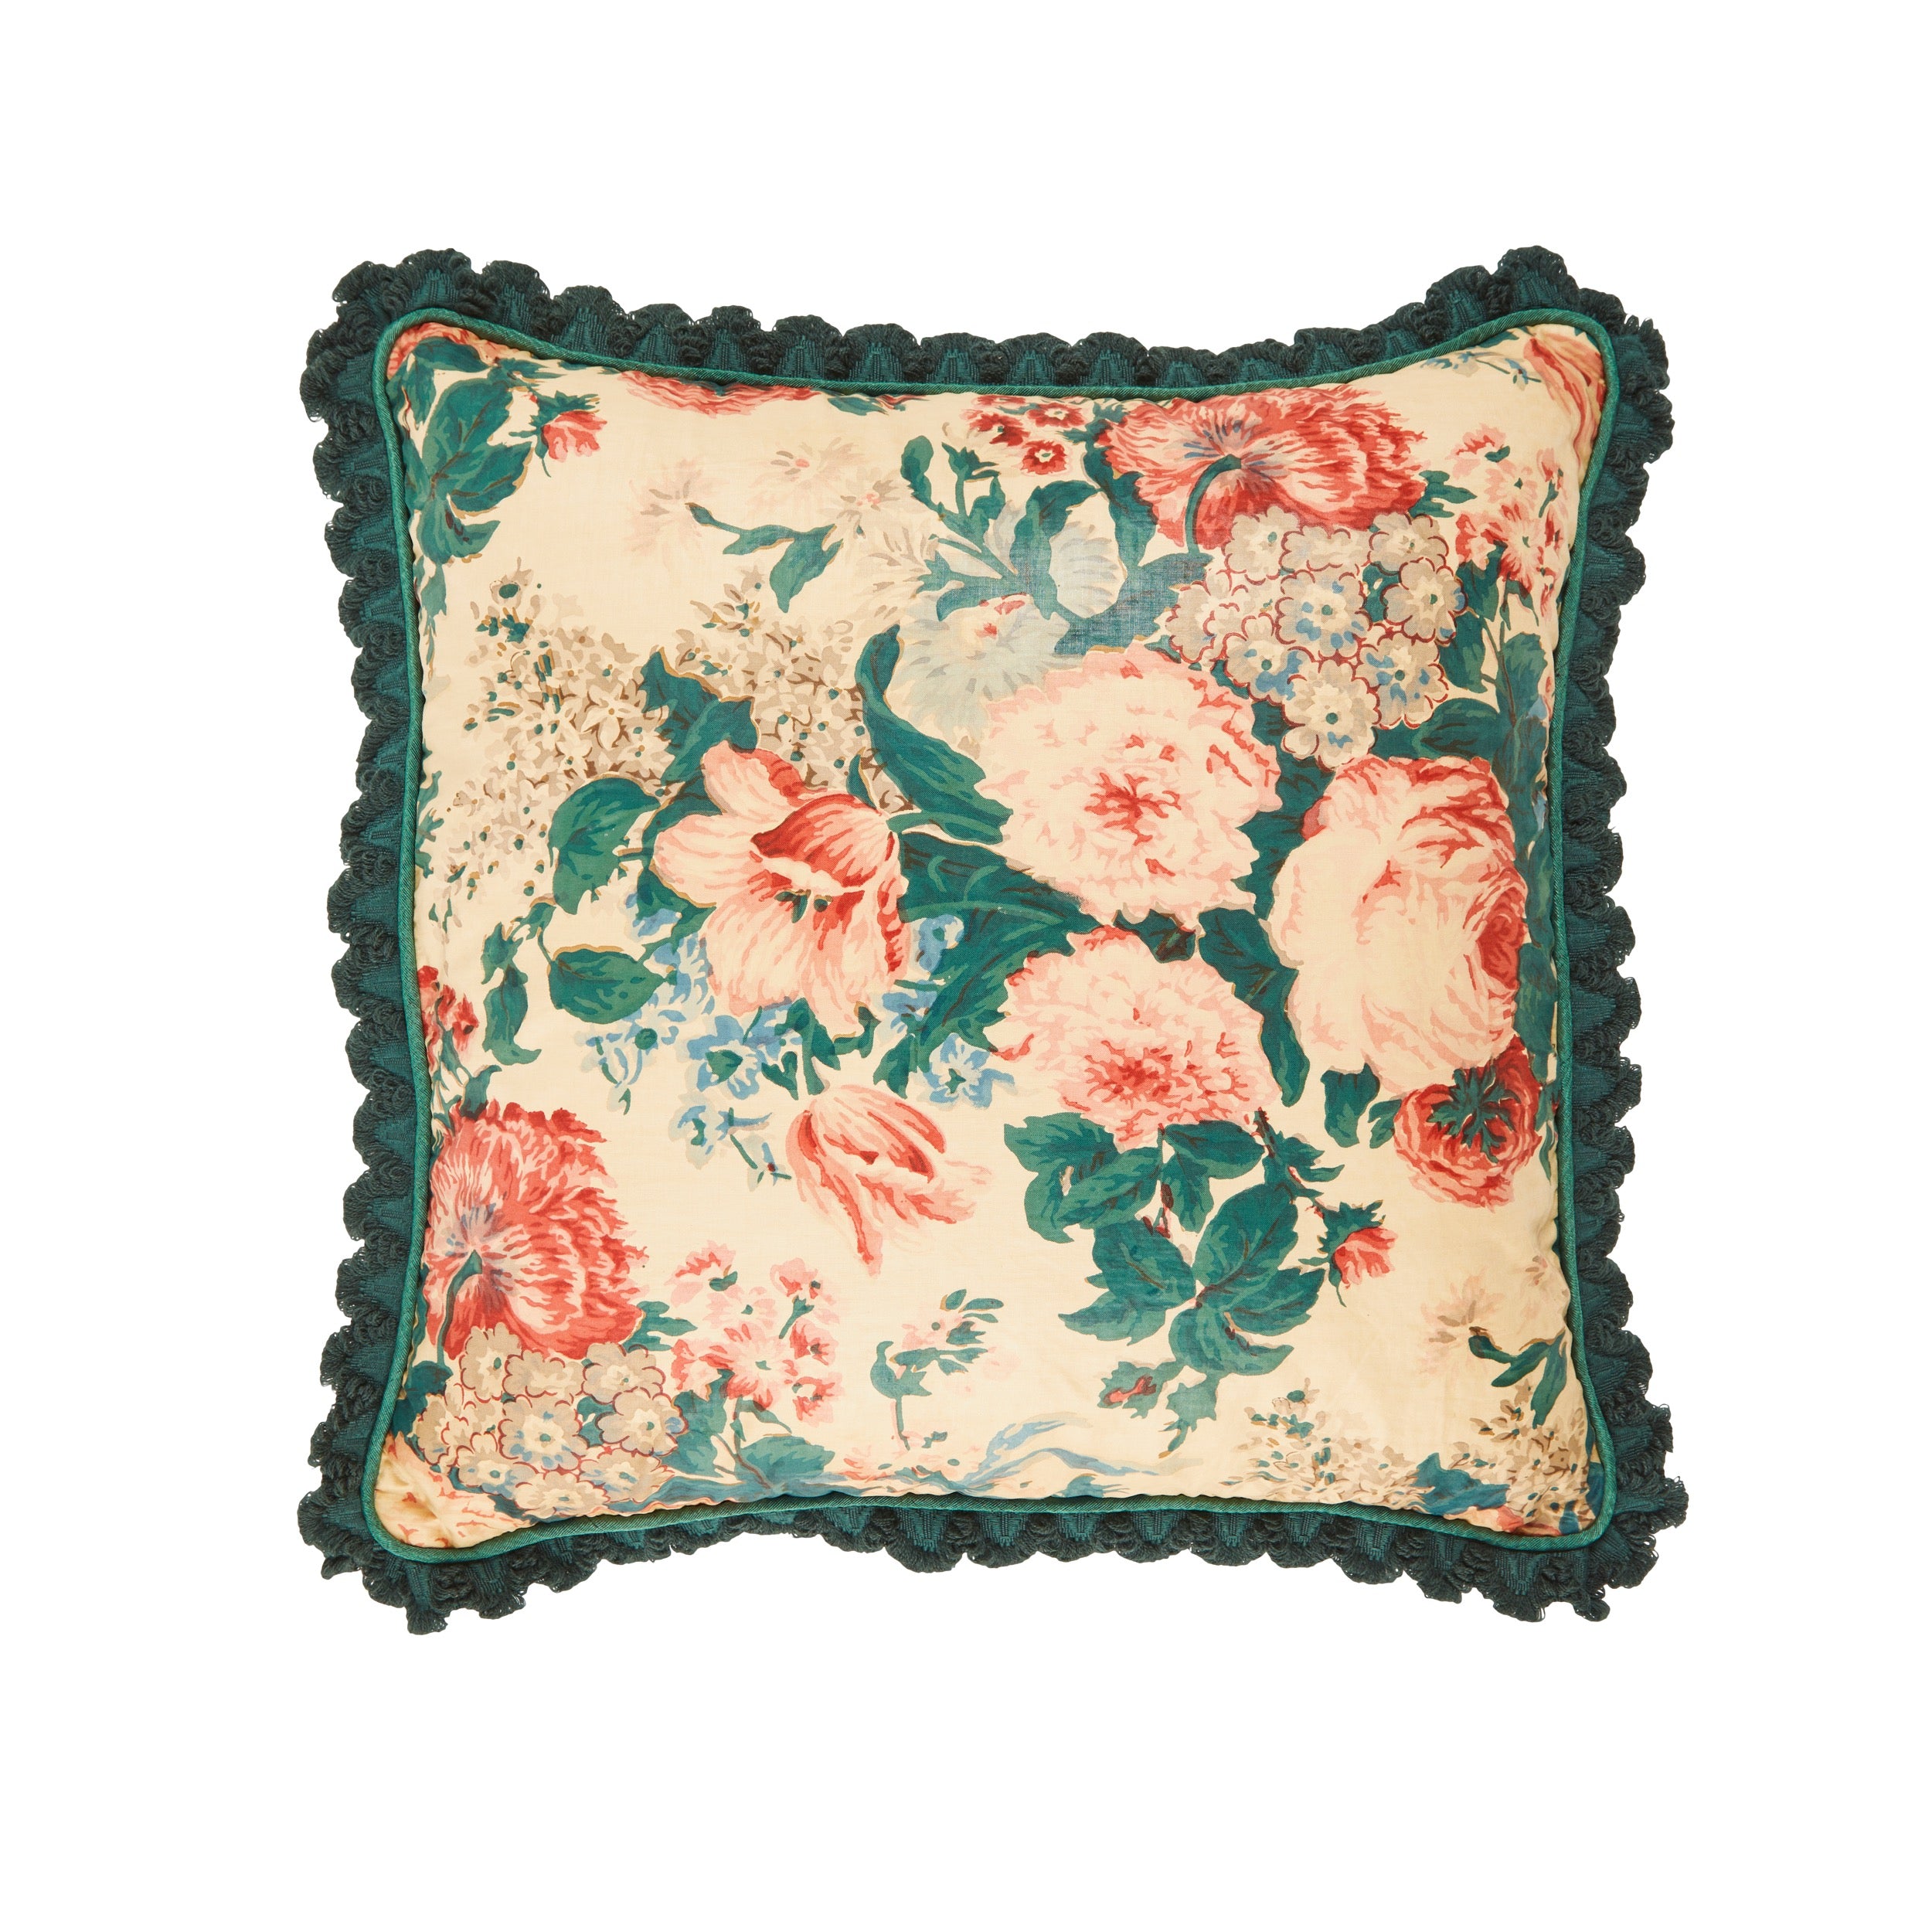 A Pair of Cushions made from 1920's English Glazed Floral Chintz with Moiré Piping and Scallop Fringe